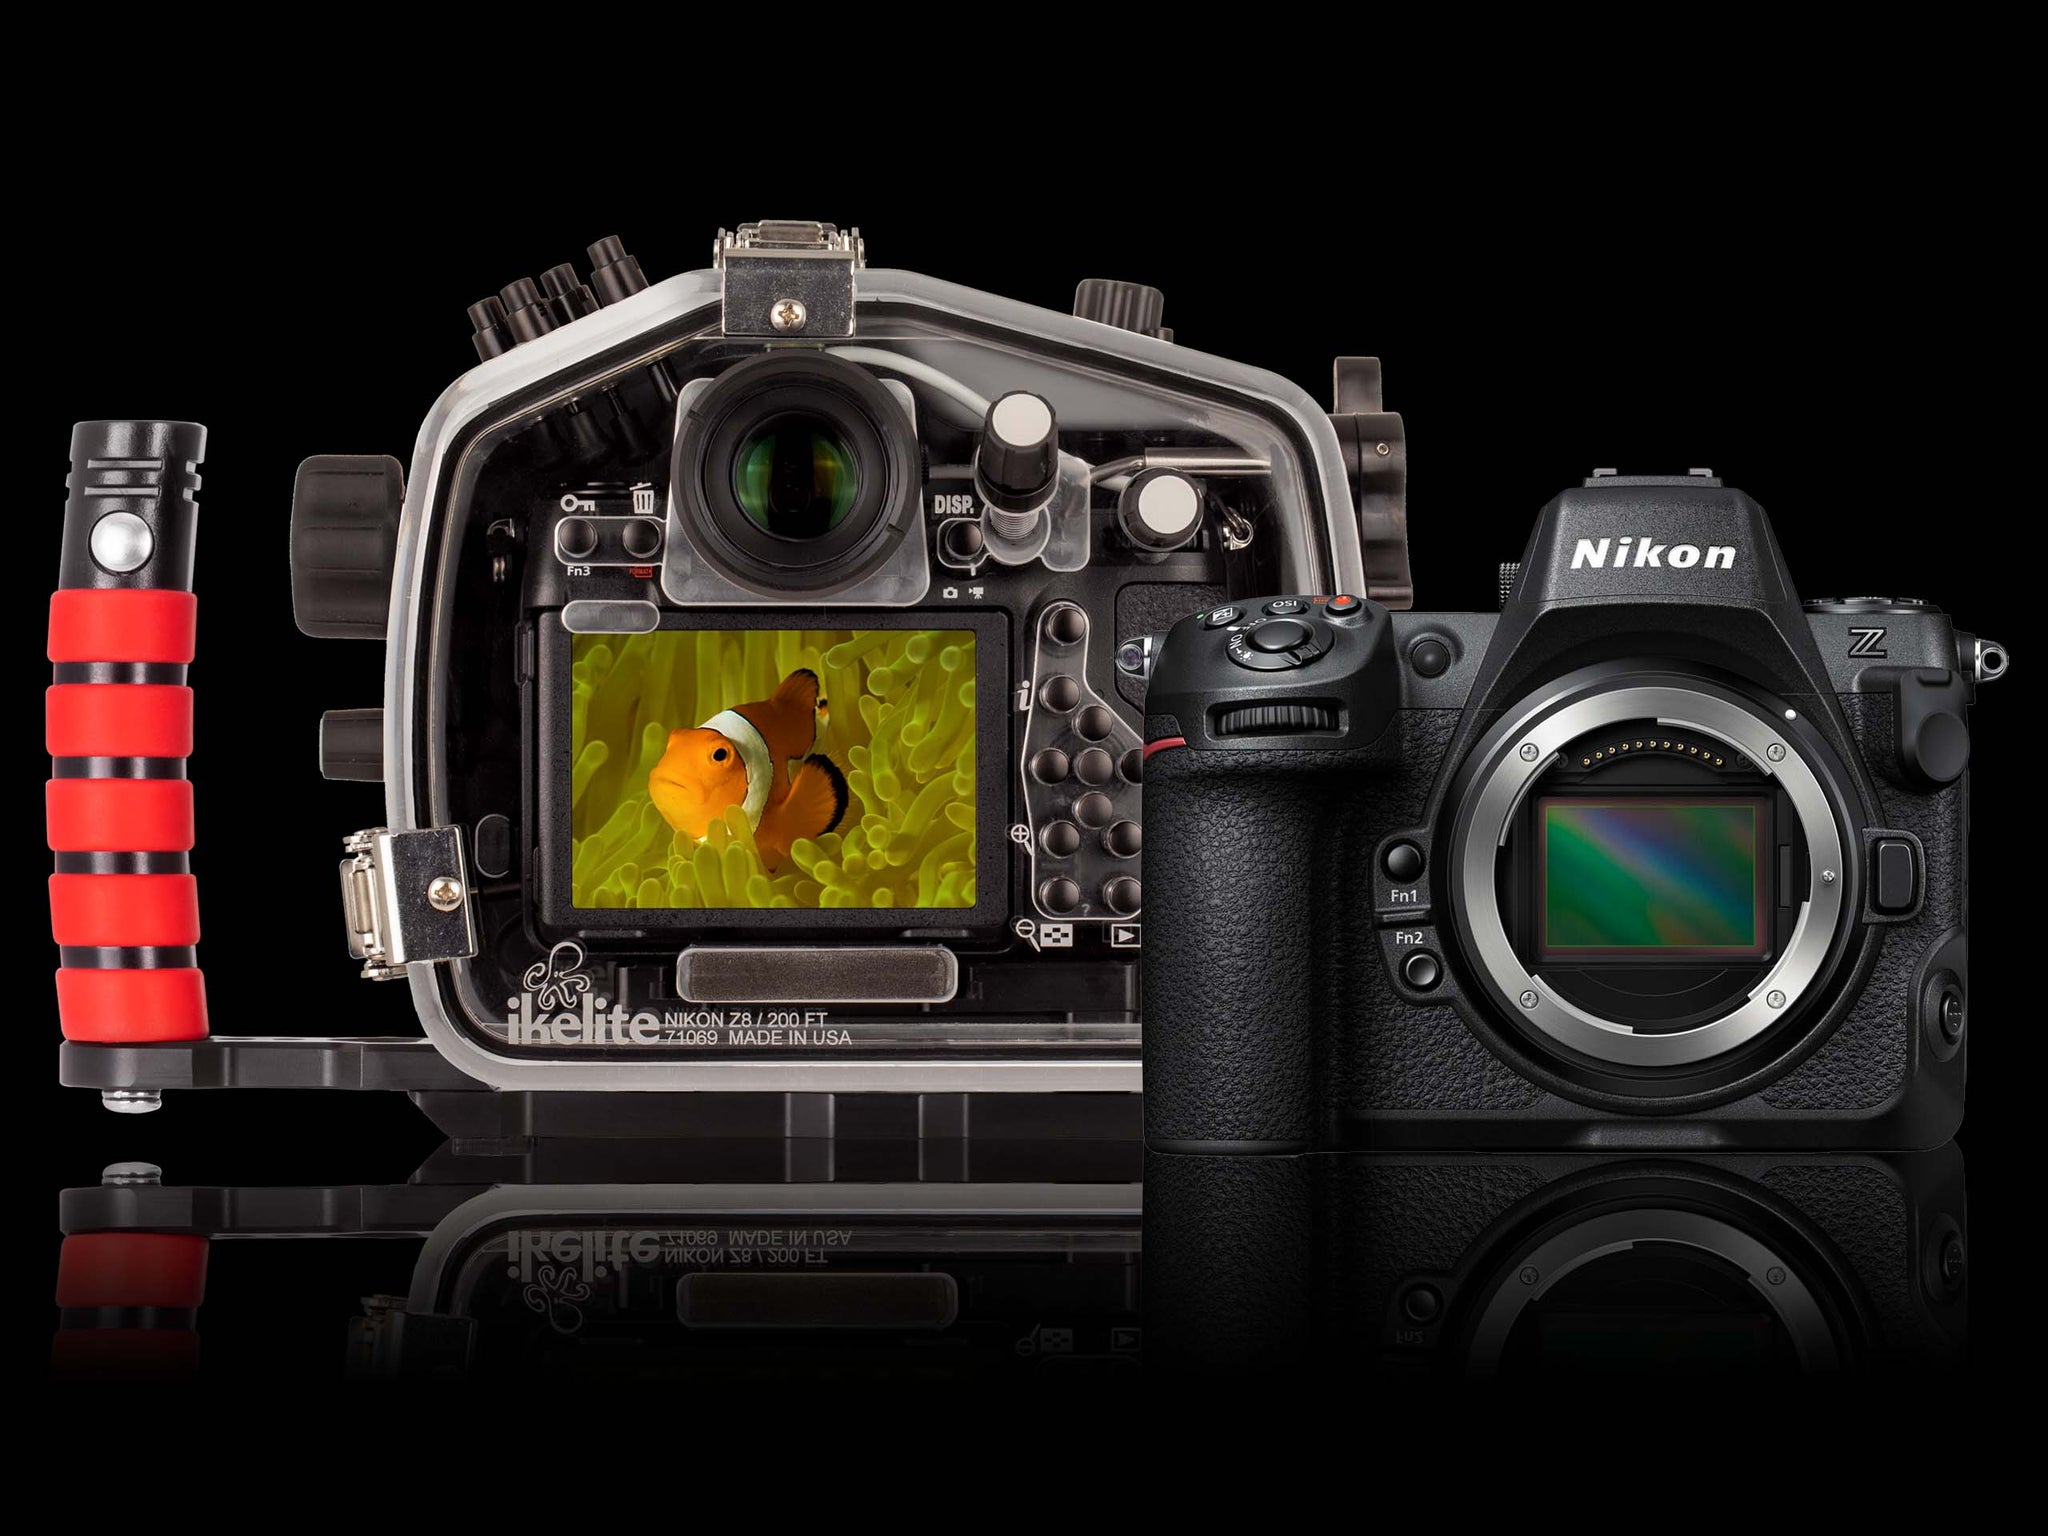 Nikon D750 Review - initial thoughts and video footage